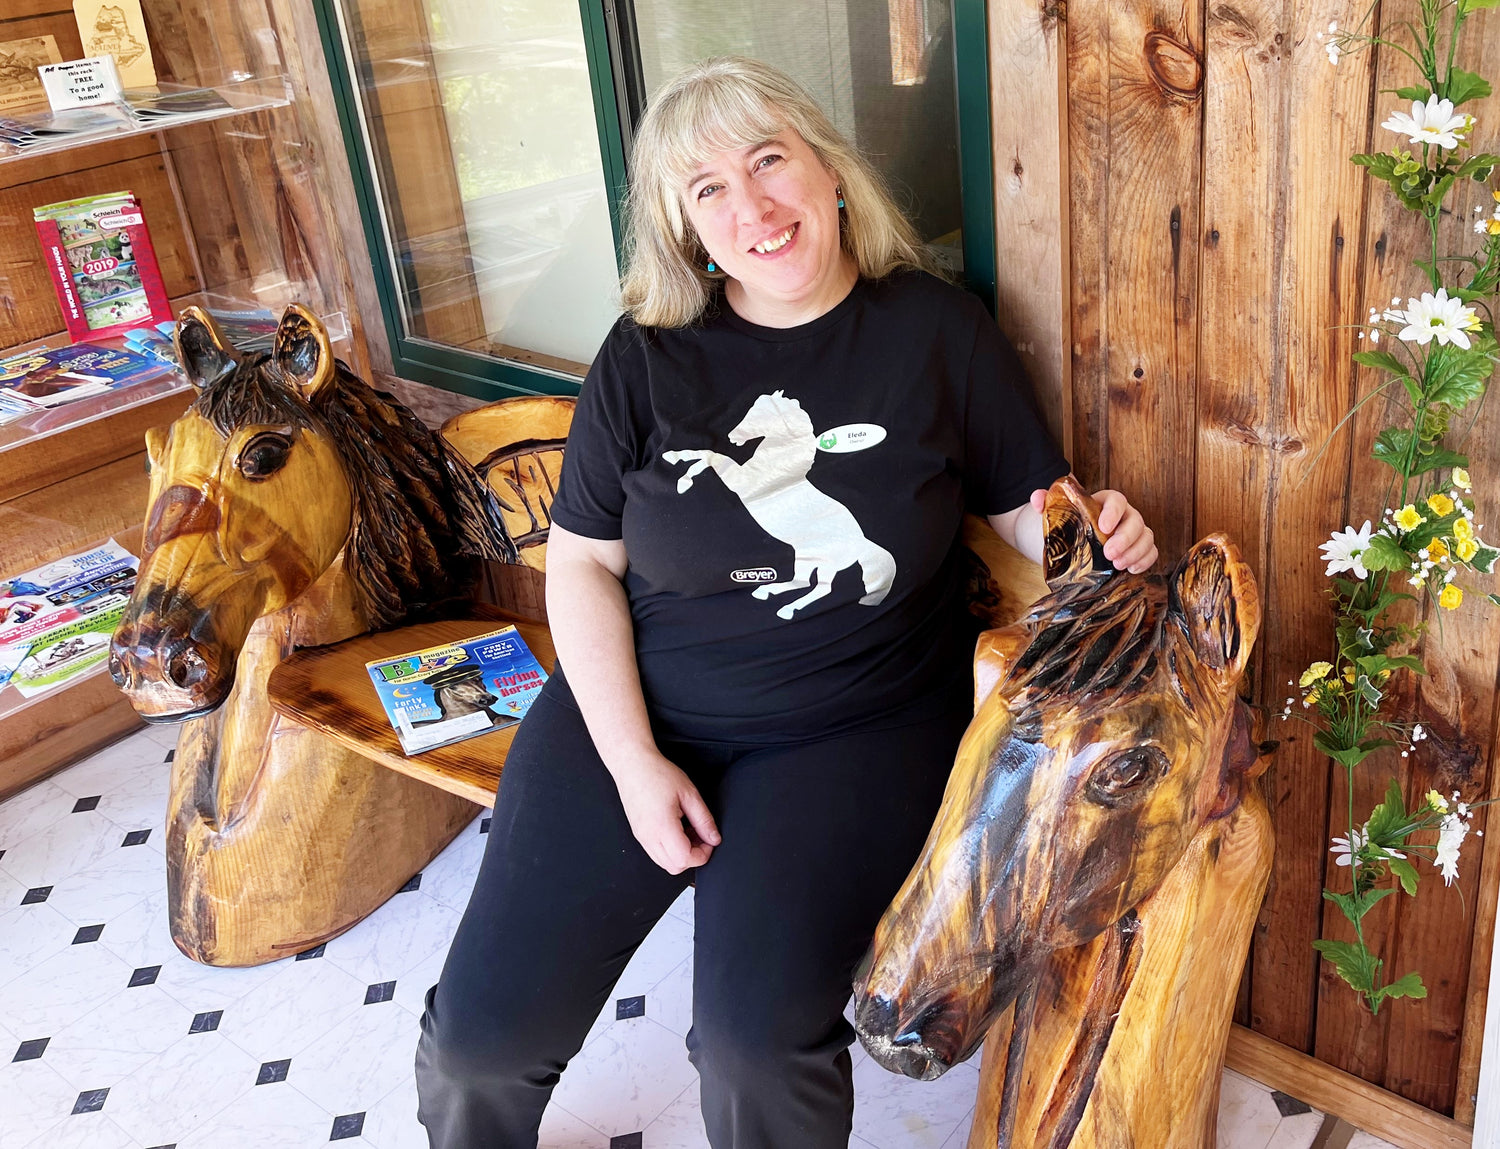 Eleda smiling, sitting on carved wood bench in the store foyer that has a horse head as each end.